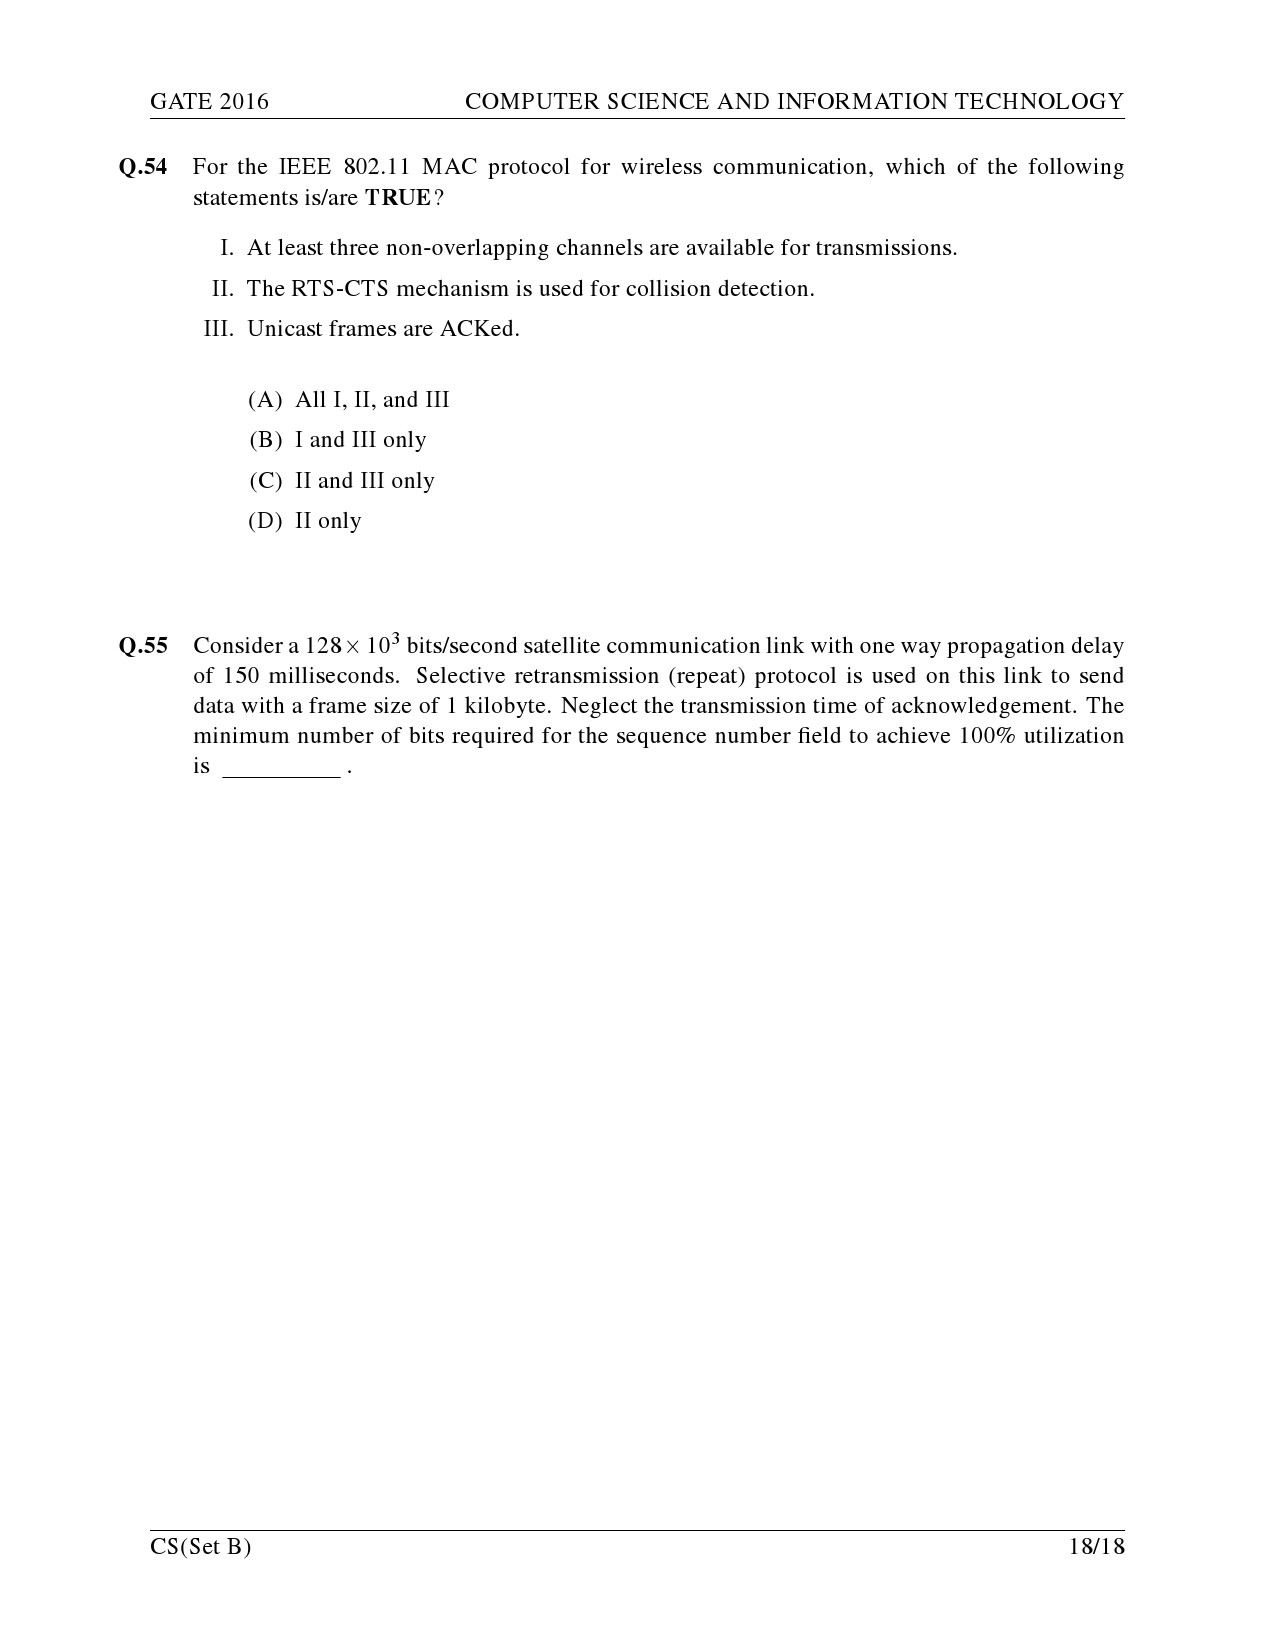 GATE Exam Question Paper 2016 Computer Science and Information Technology Set B 21